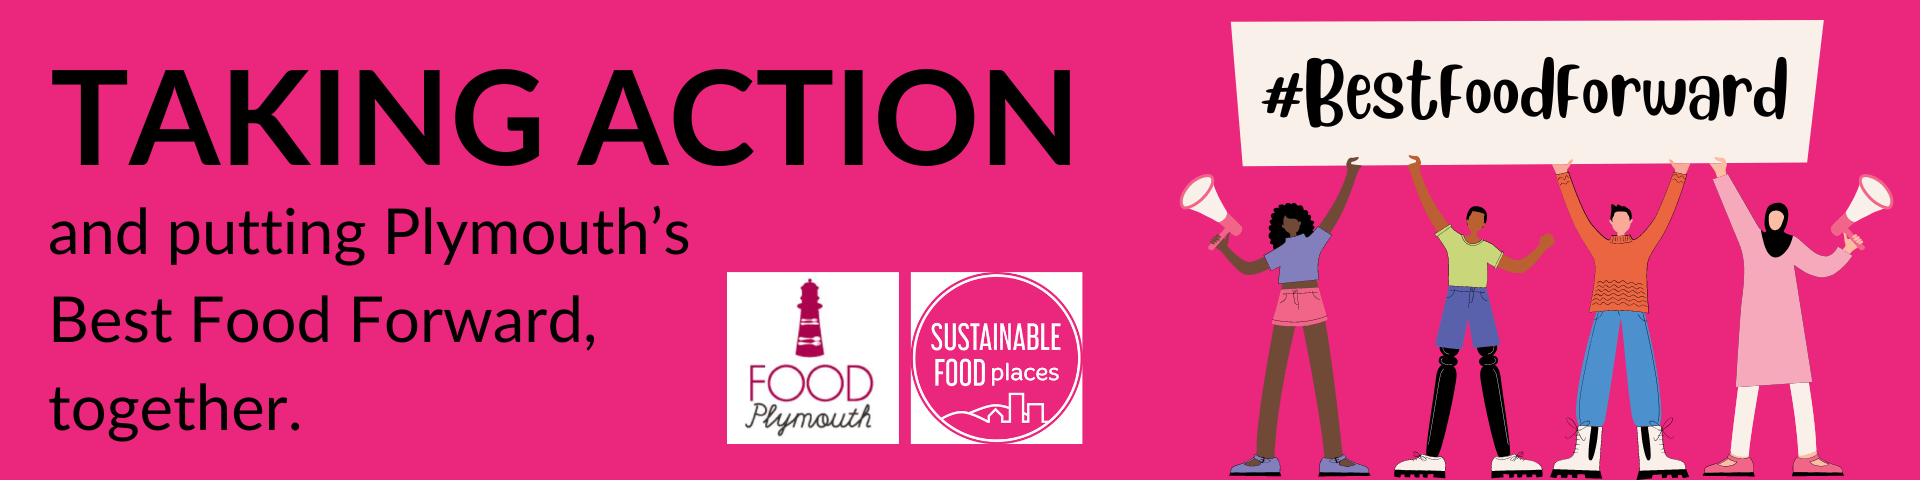 Pledge an action to put Plymouth's Best Food Forward together